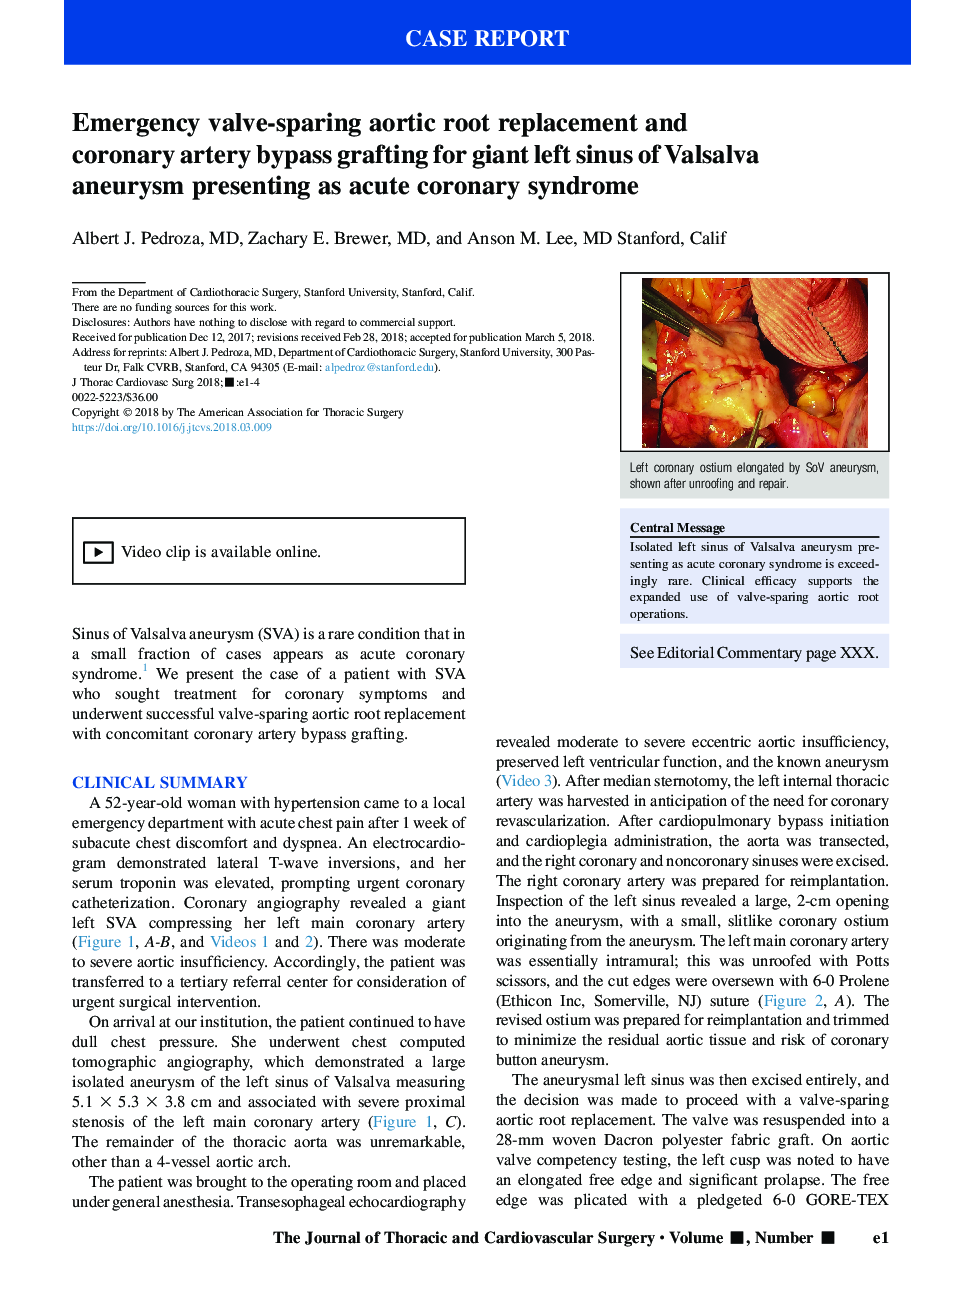 Emergency valve-sparing aortic root replacement and coronary artery bypass grafting for giant left sinus of Valsalva aneurysm presenting as acute coronary syndrome